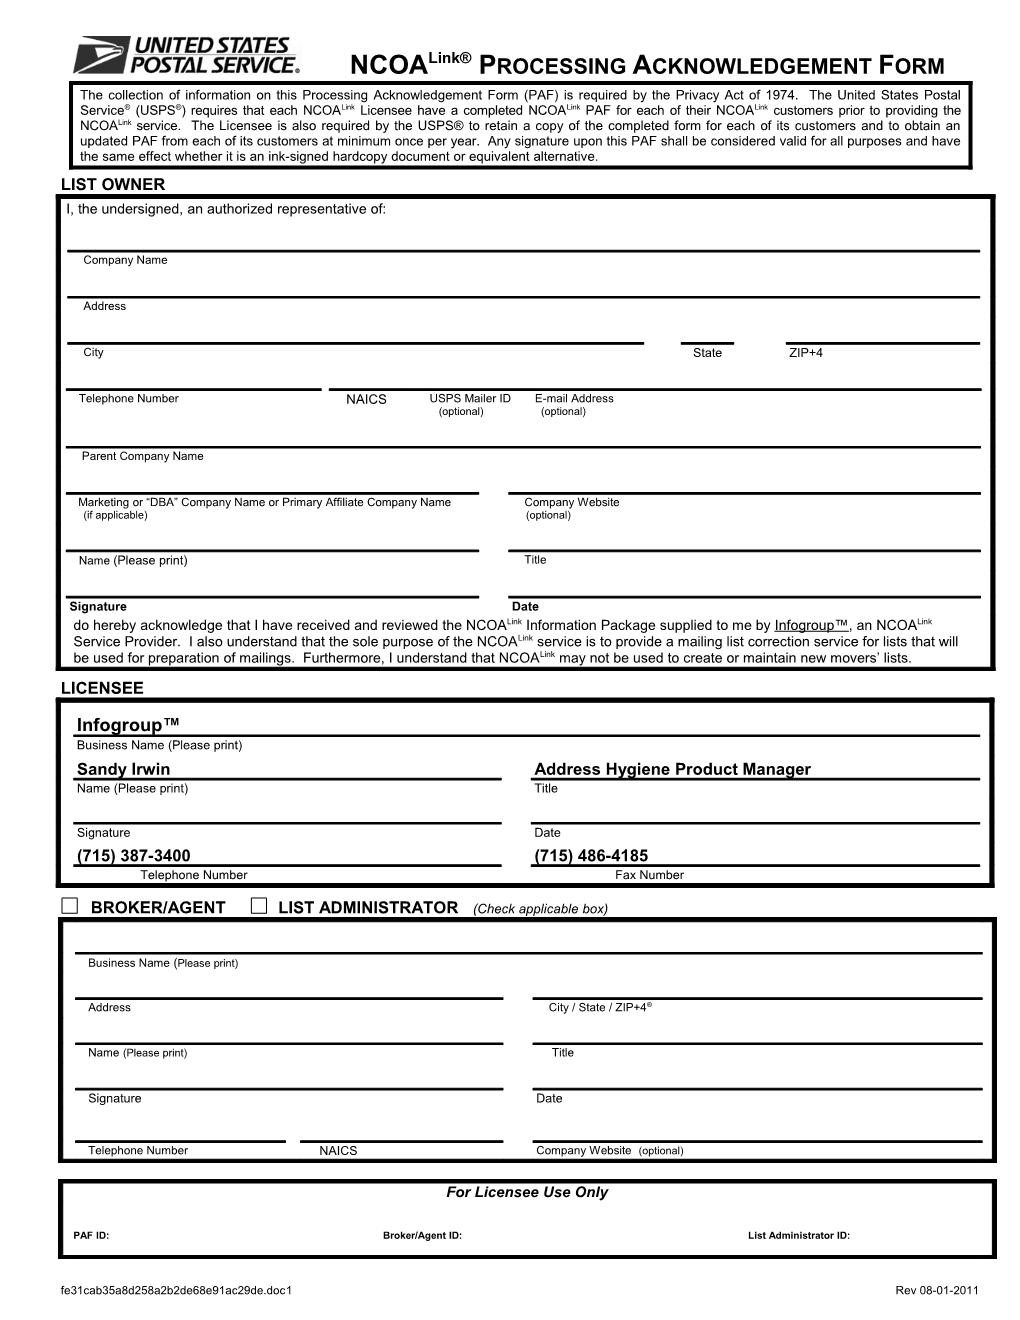 Ncoalink PROCESSING ACKNOWLEDGEMENT FORM